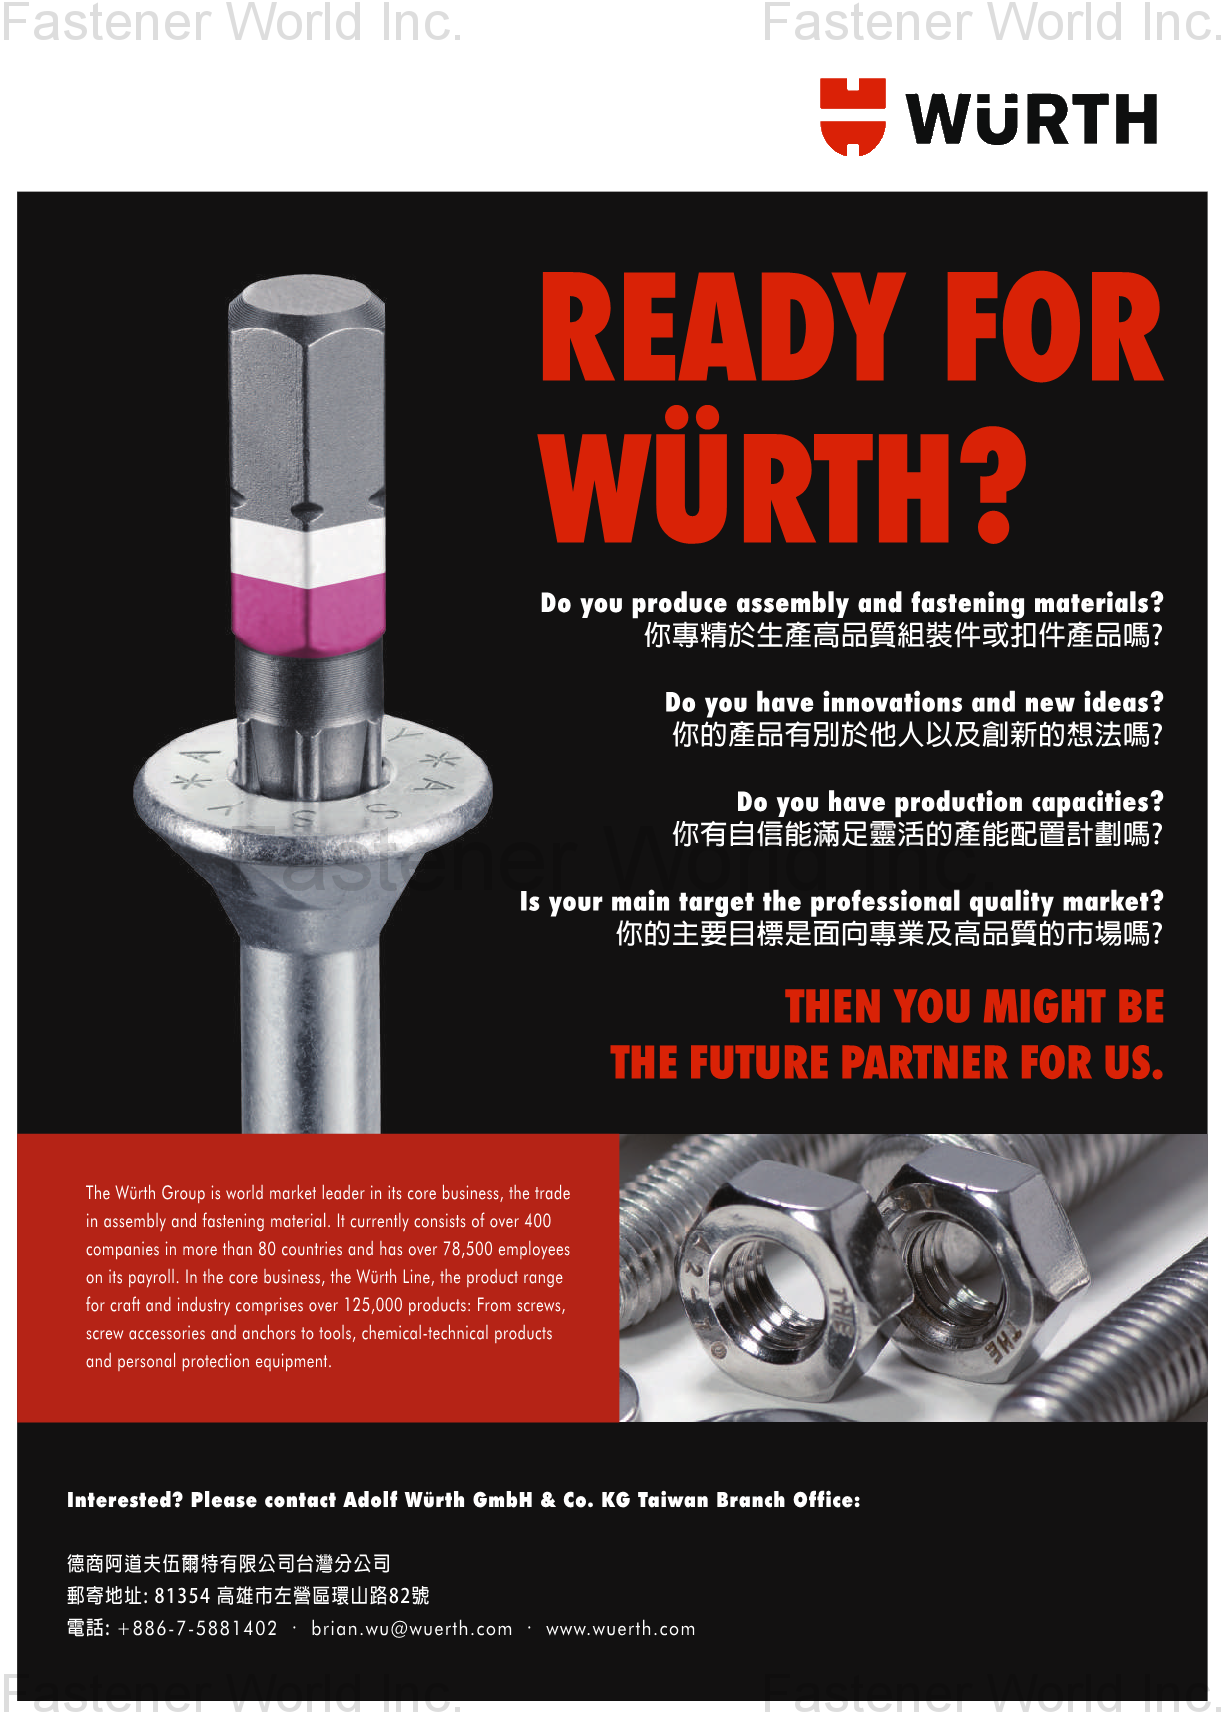 WURTH GROUP (Adolf Wurth GmbH & Co. KG) , Form Screws, Screw Accessories, Anchor to Tools, Chemical-technical Products